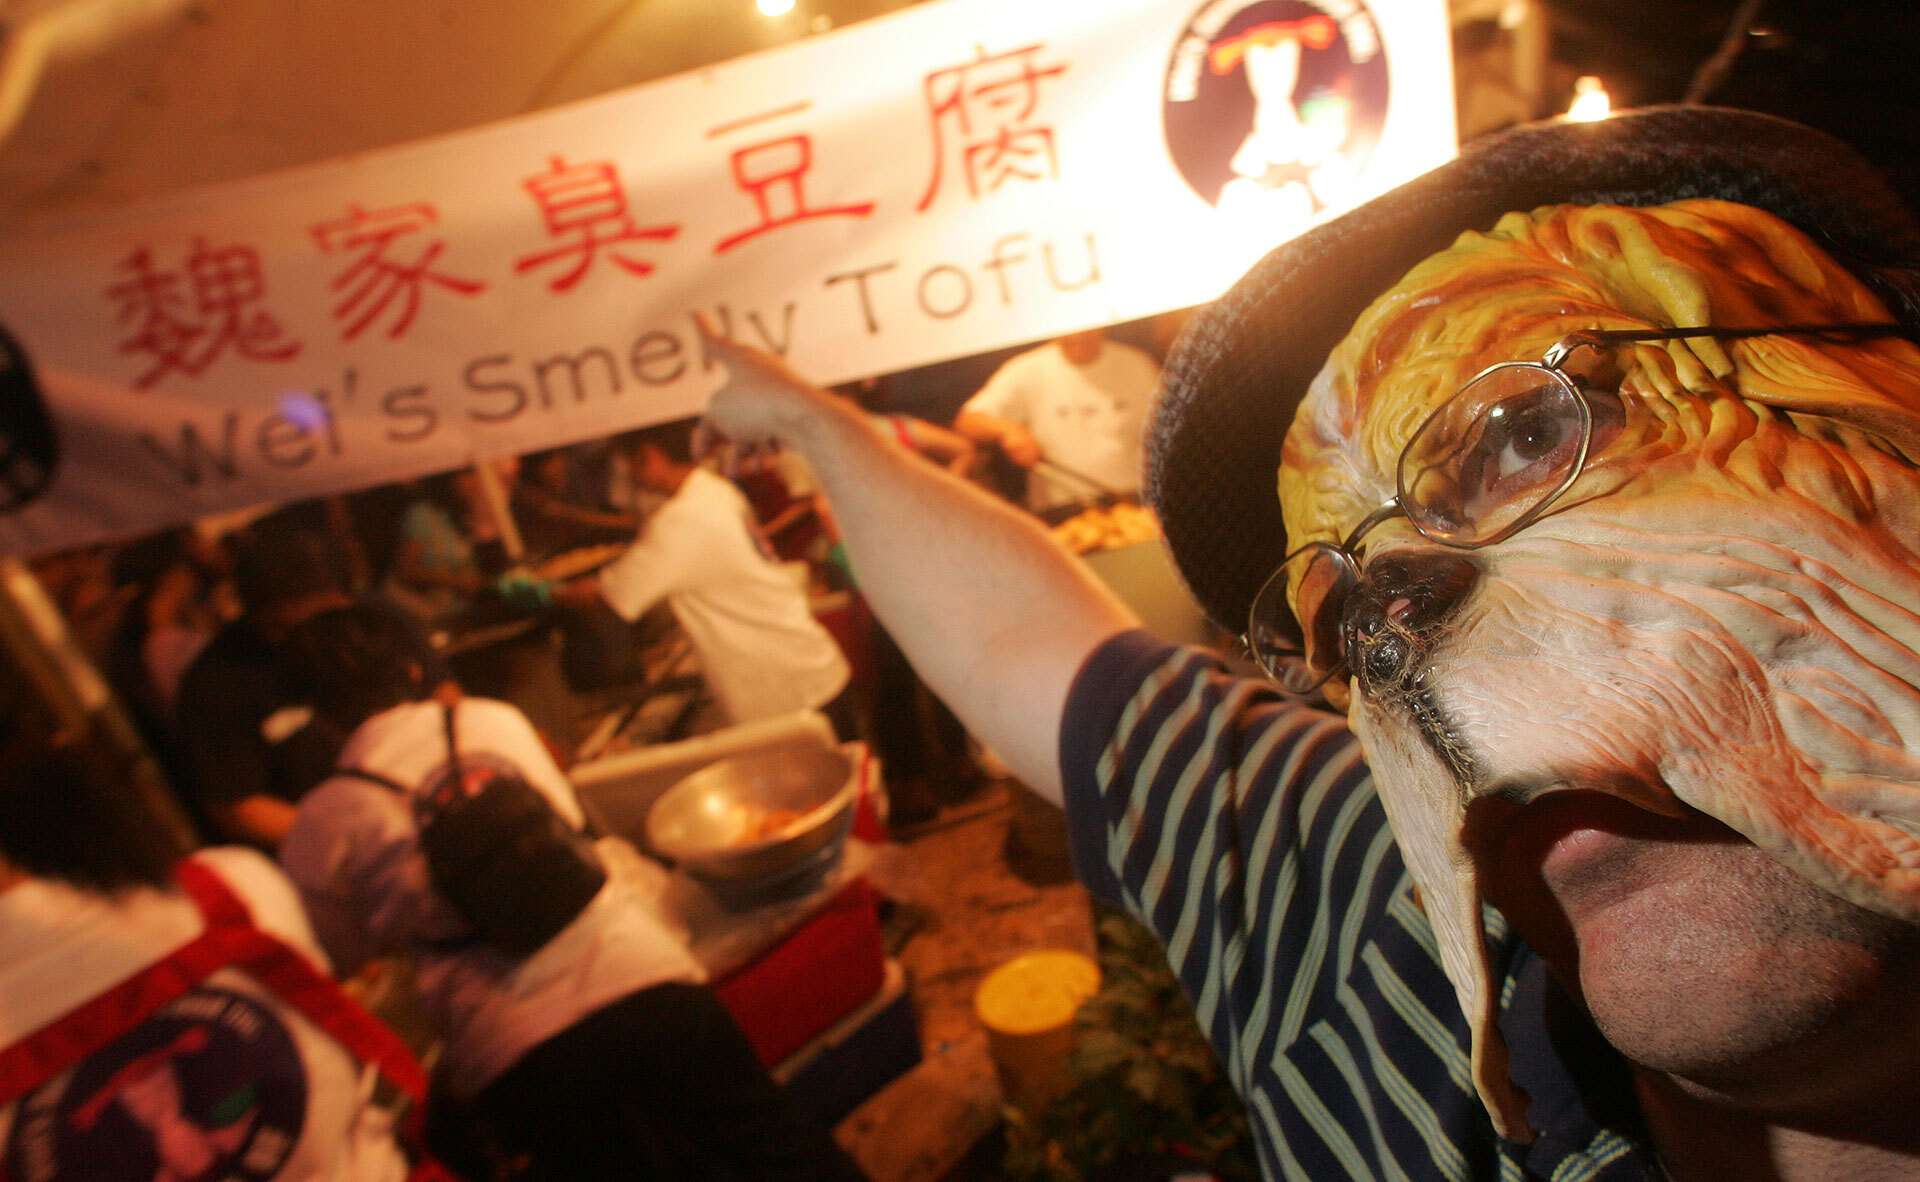 A man wearing a dog mask and glasses points to a street stall sign that reads, "Wei's Smelly Tofu."